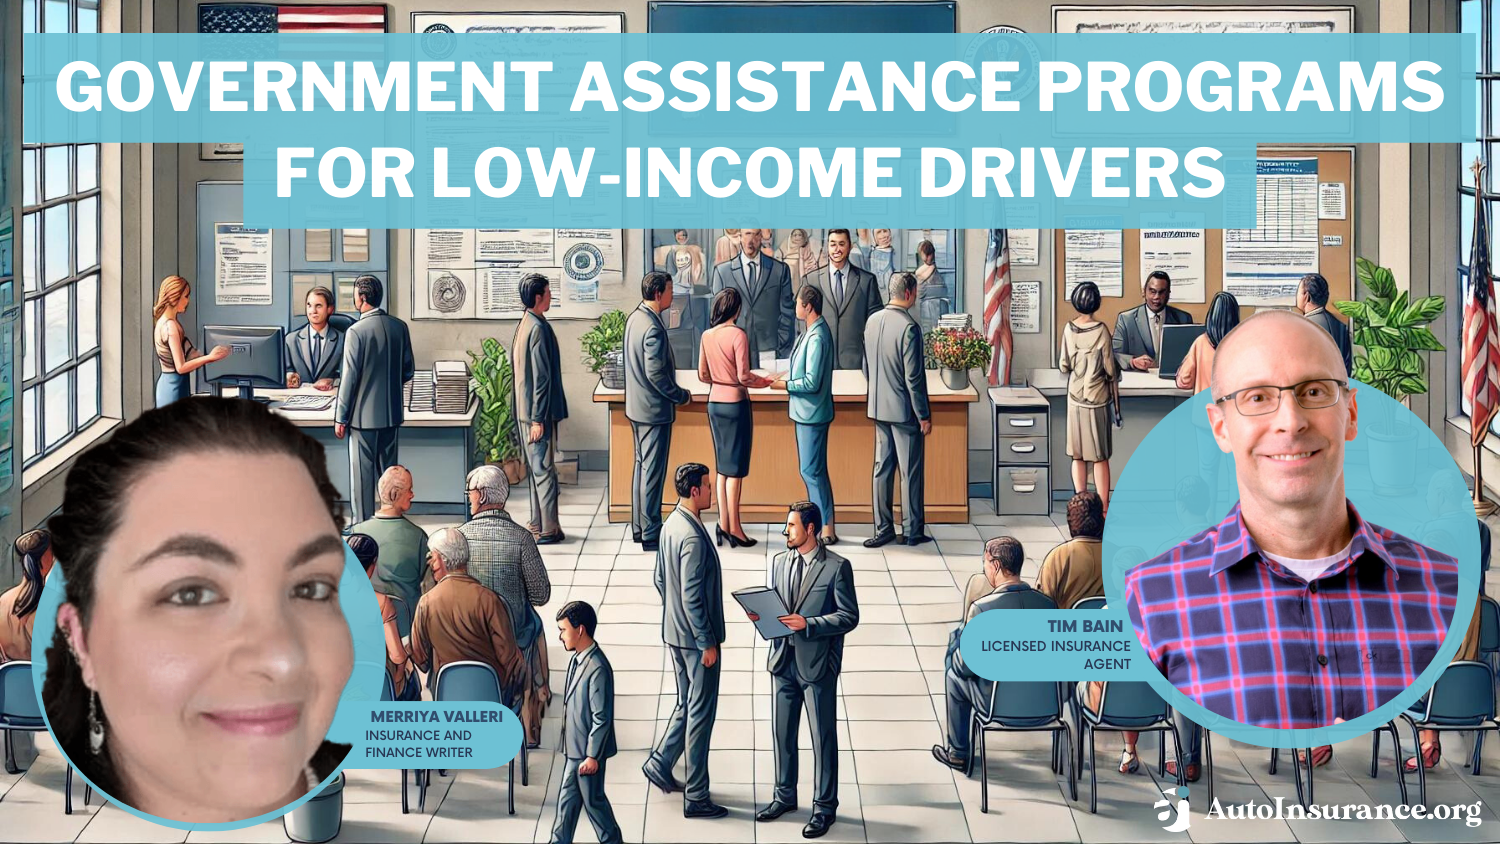 Government Assistance Programs for Low-Income Drivers: California, New Jersey, and Hawaii